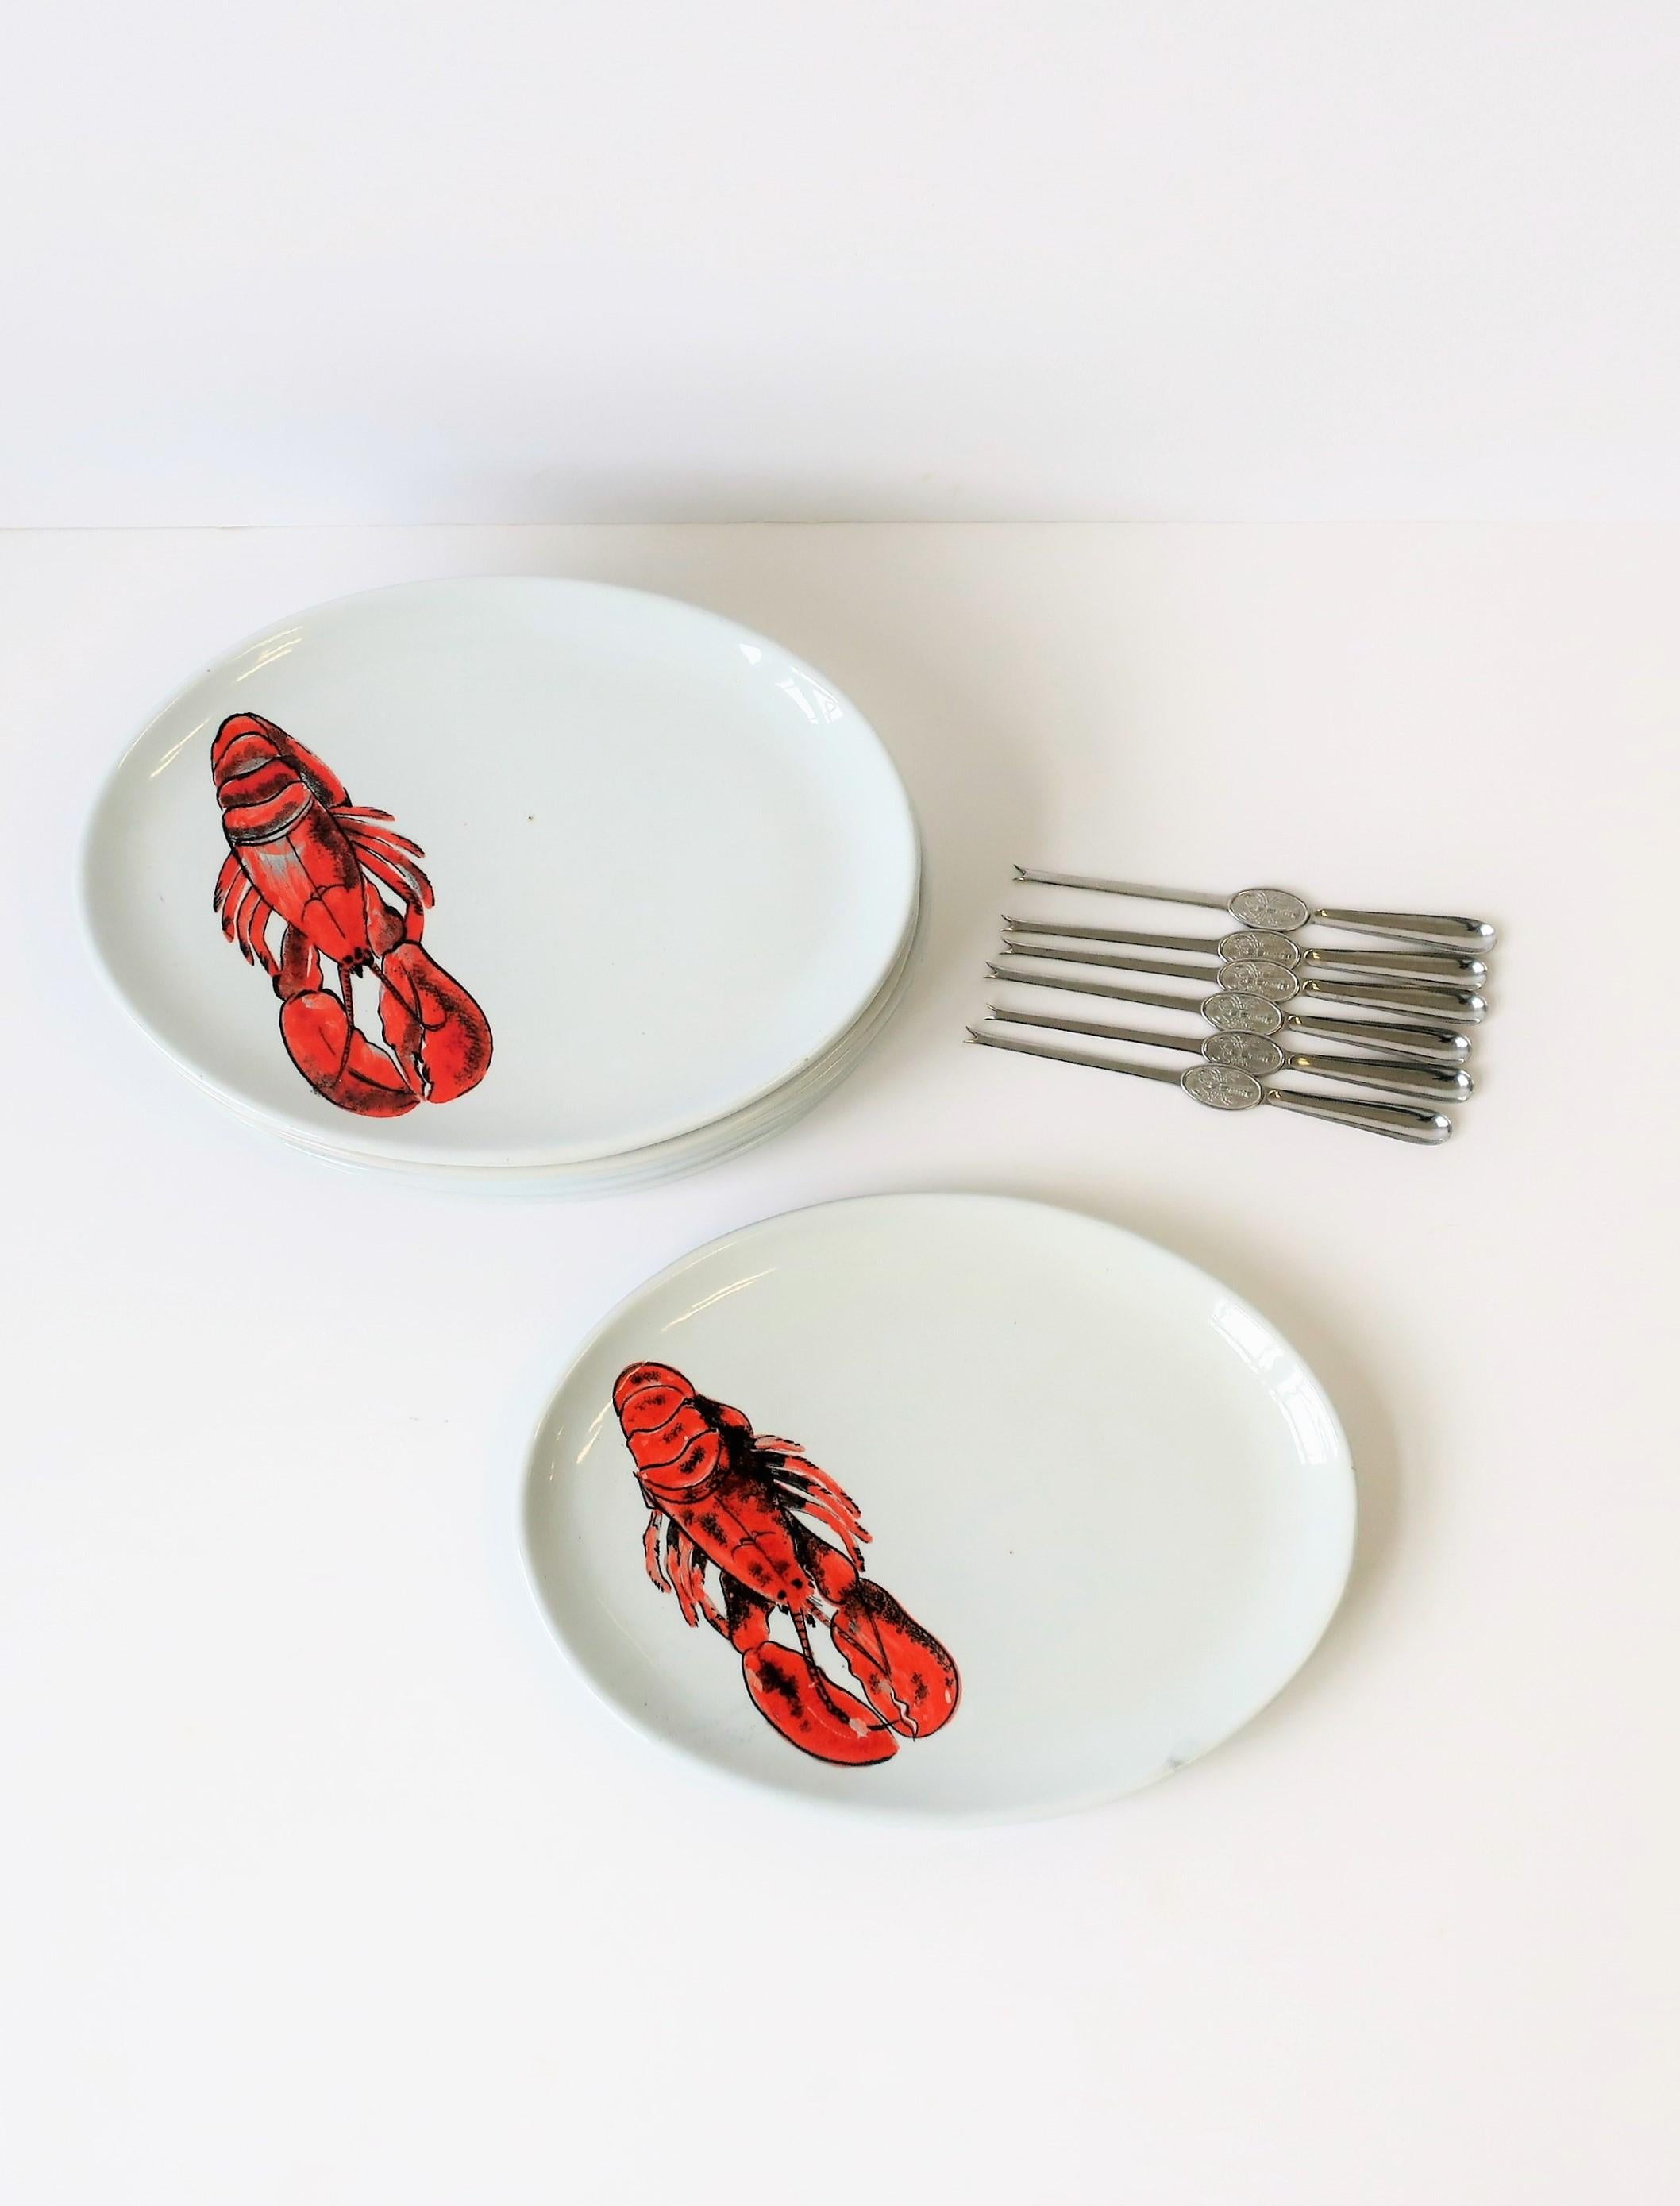 Summer Italian Lobster Dinner Plates with Forks from Sweden, Set of 6 For Sale 2